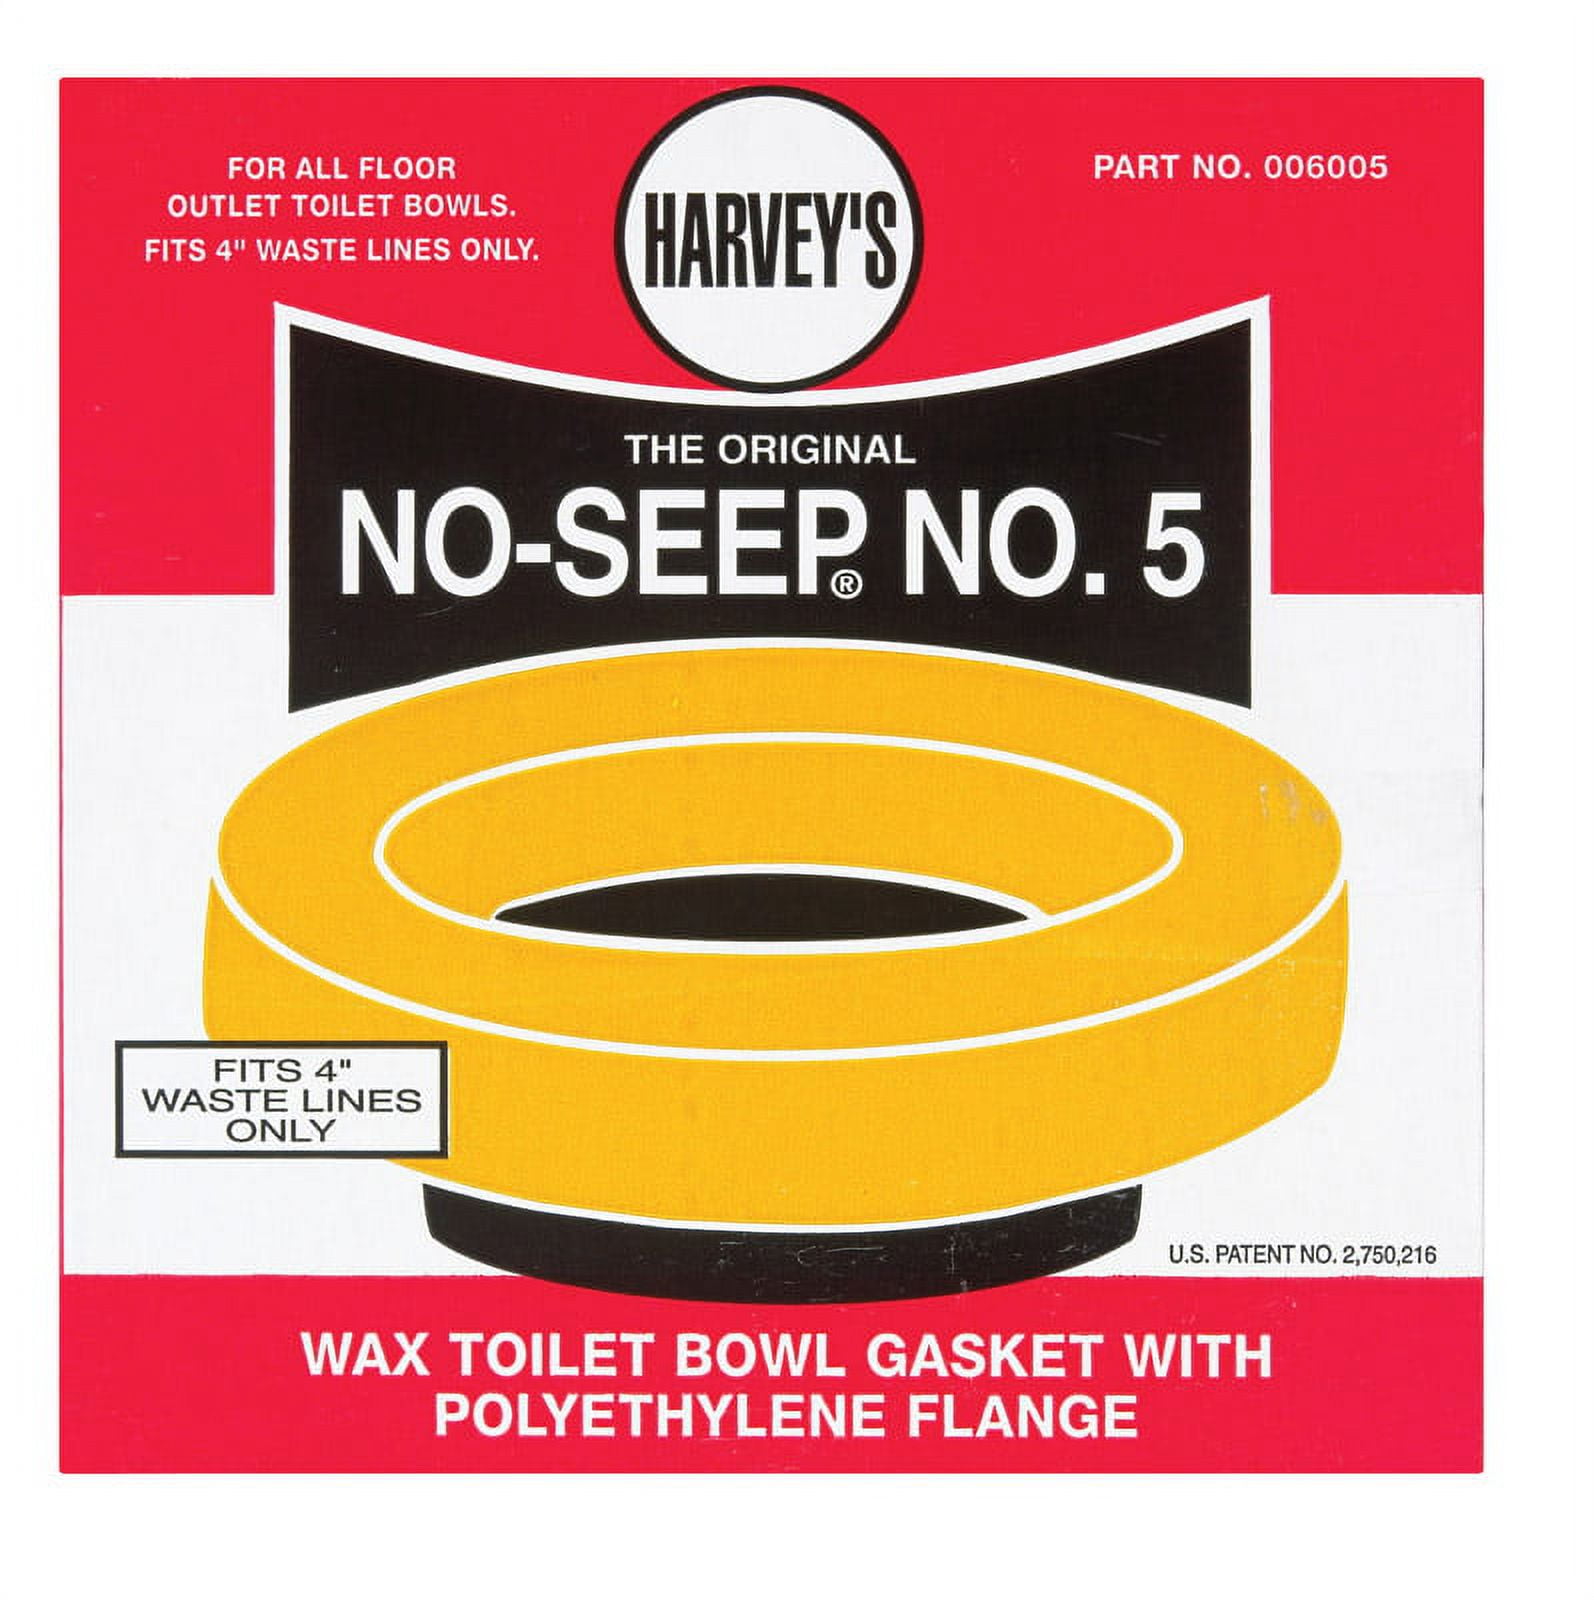 49683 Toilet Bowl Gasket With Wax & Flange Polyethylene - Case Of 24